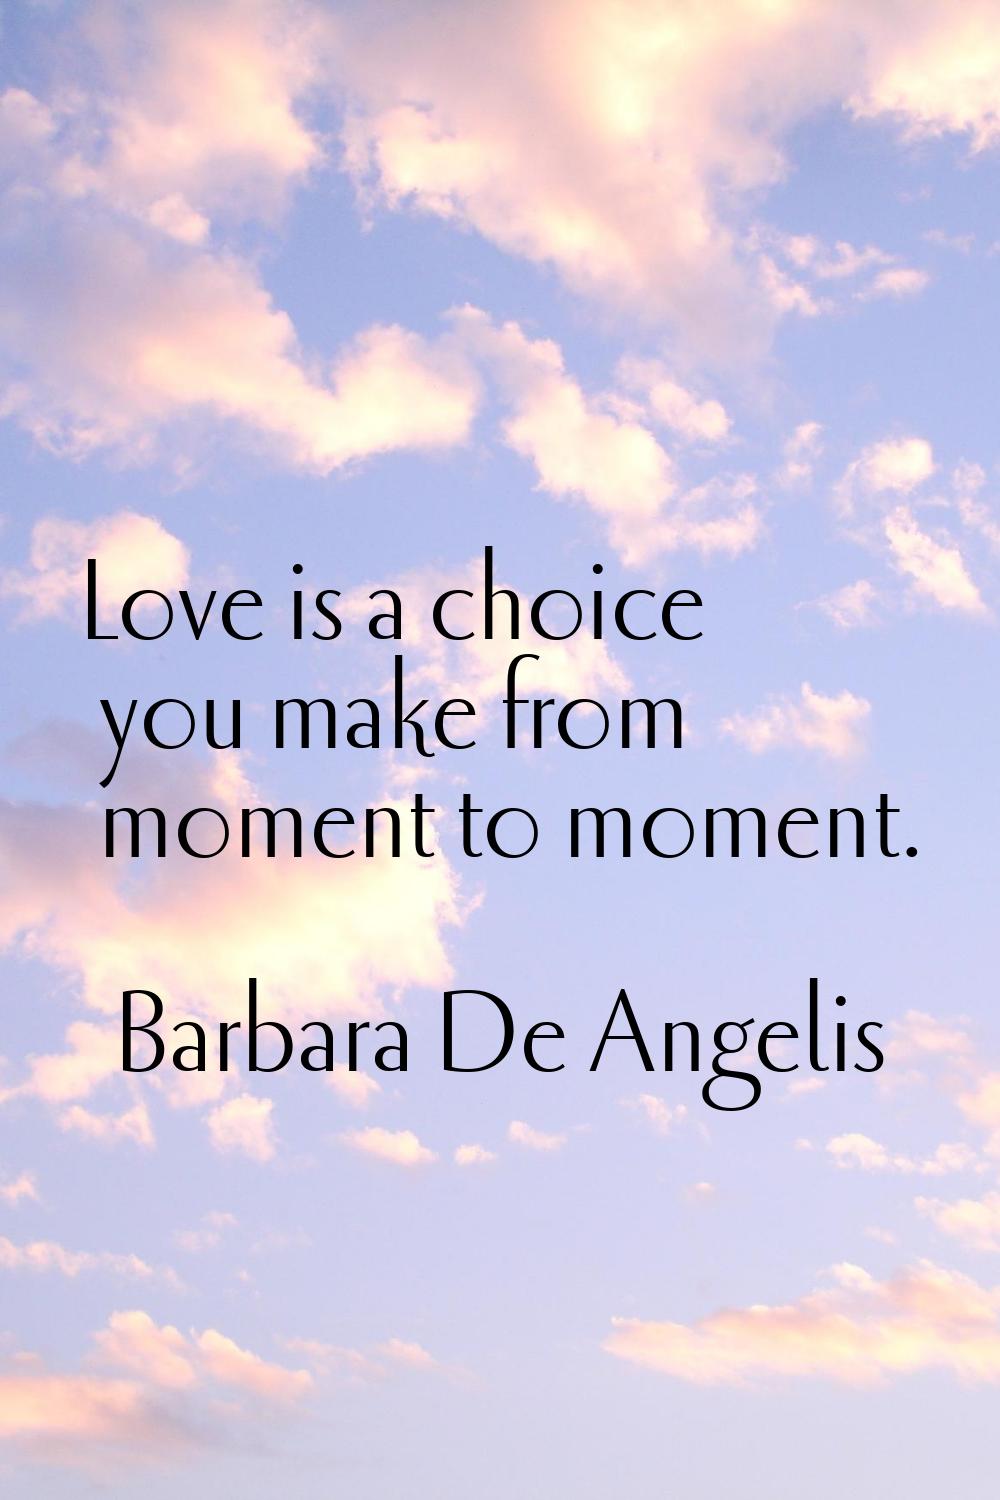 Love is a choice you make from moment to moment.